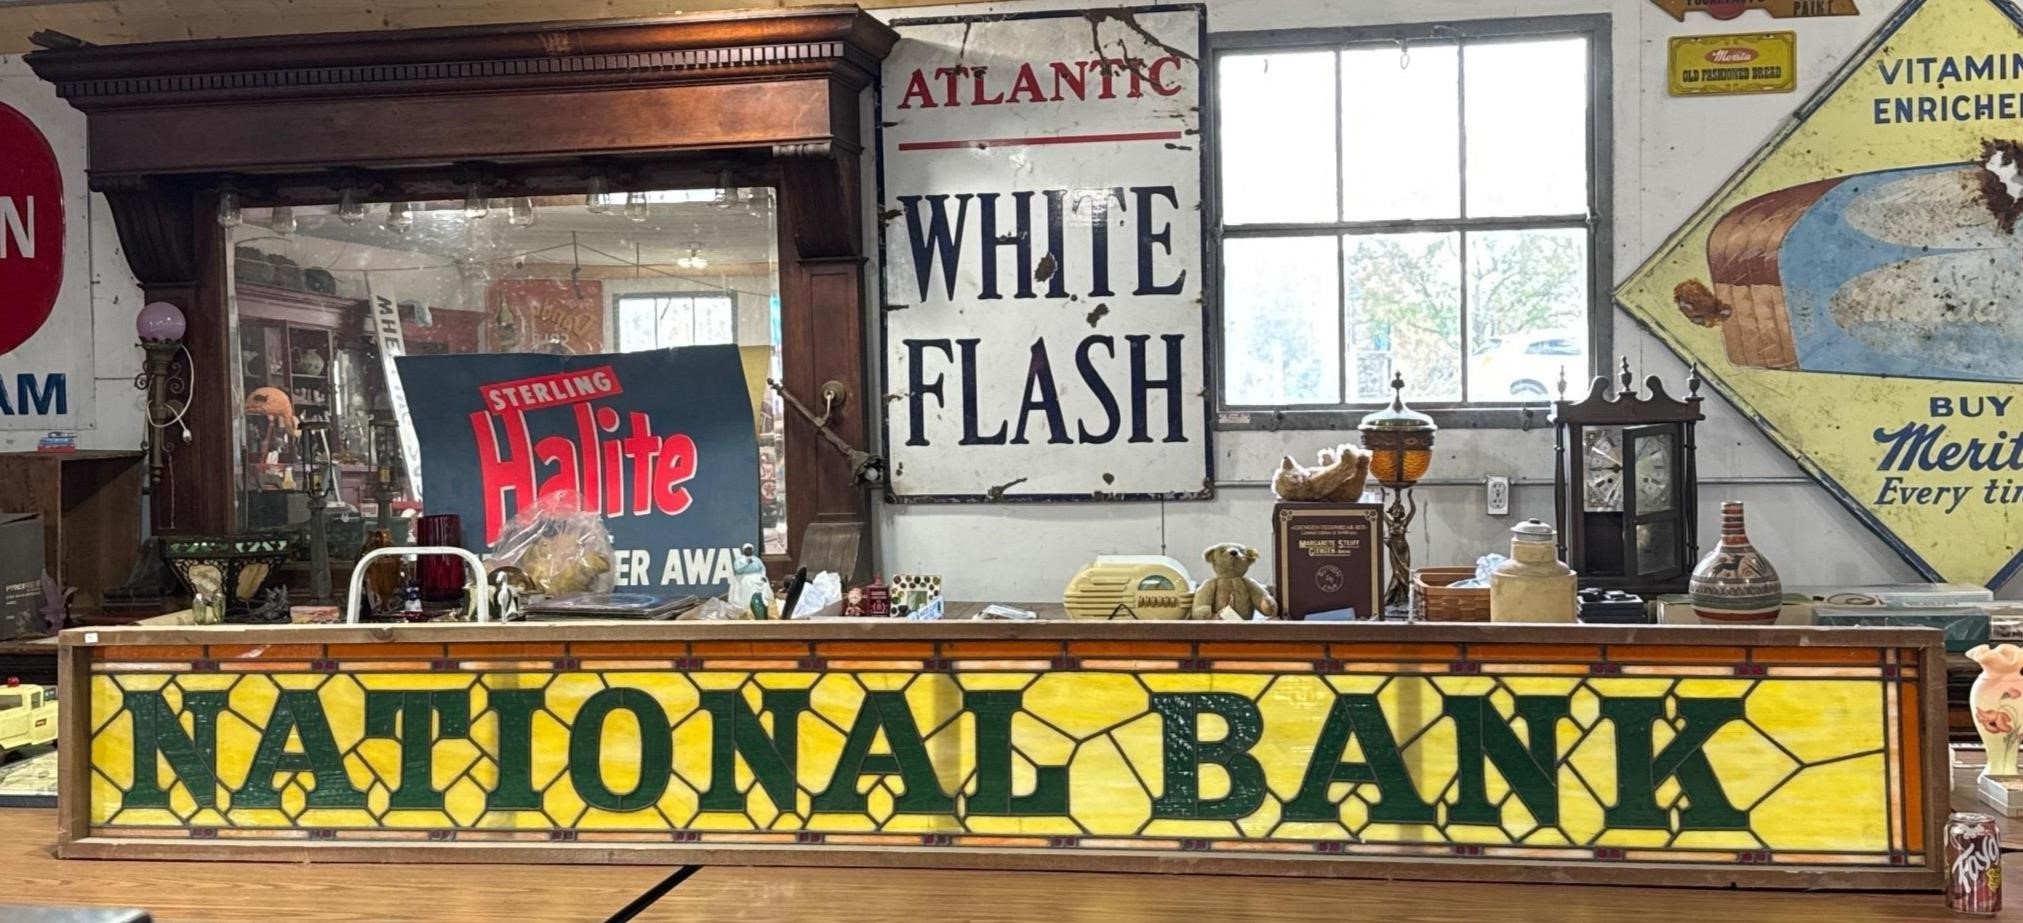 106X13 IN NATIONAL BANK ANTIQUE STAINED GLASS SIGN